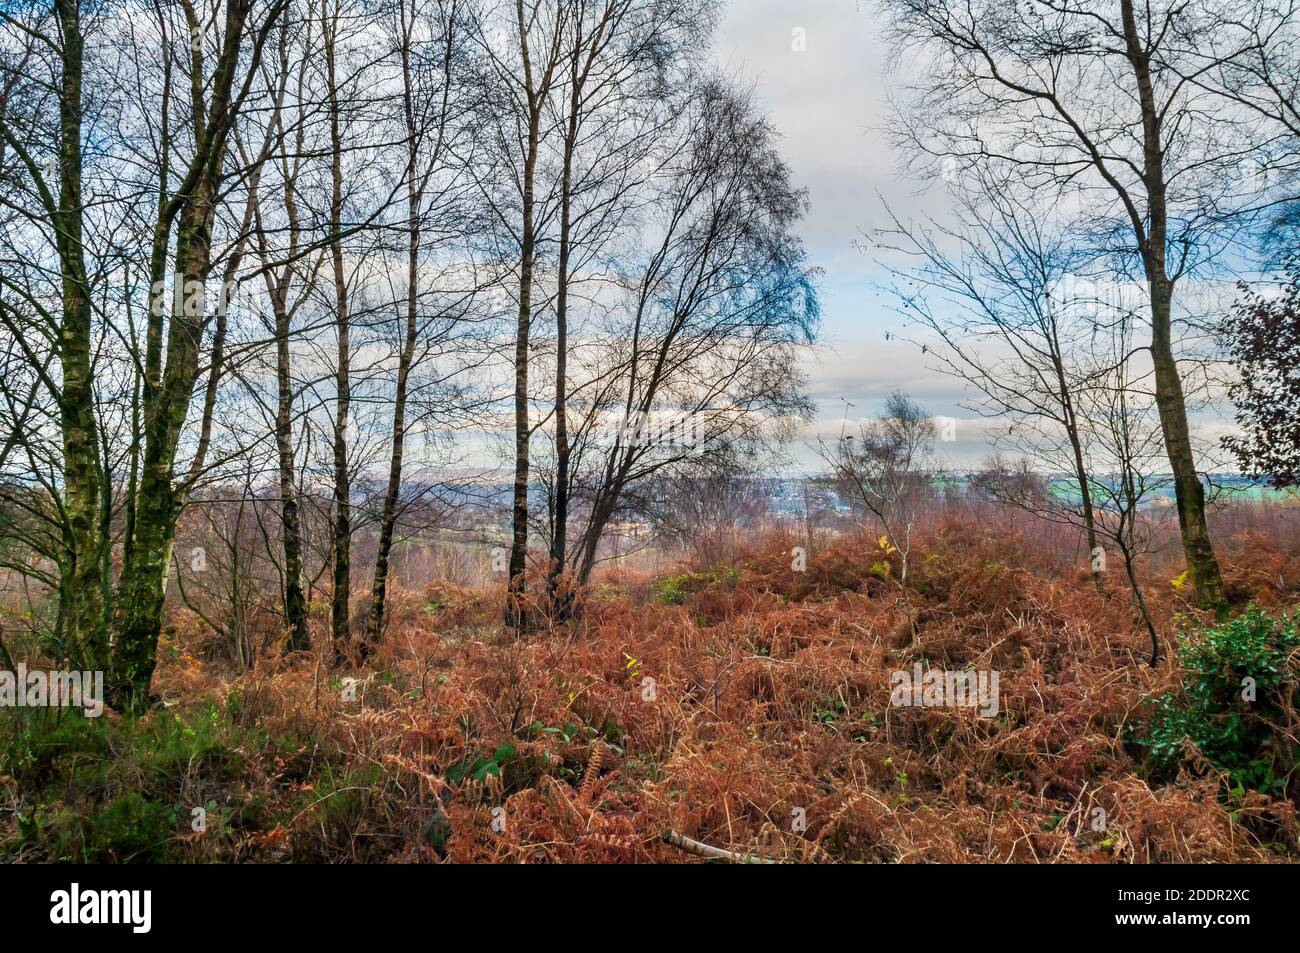 Silver birch trees growing amidst bracken on the steep slopes at Strawberry Lee, between Blacka Moor and Totley near Sheffield. Stock Photo